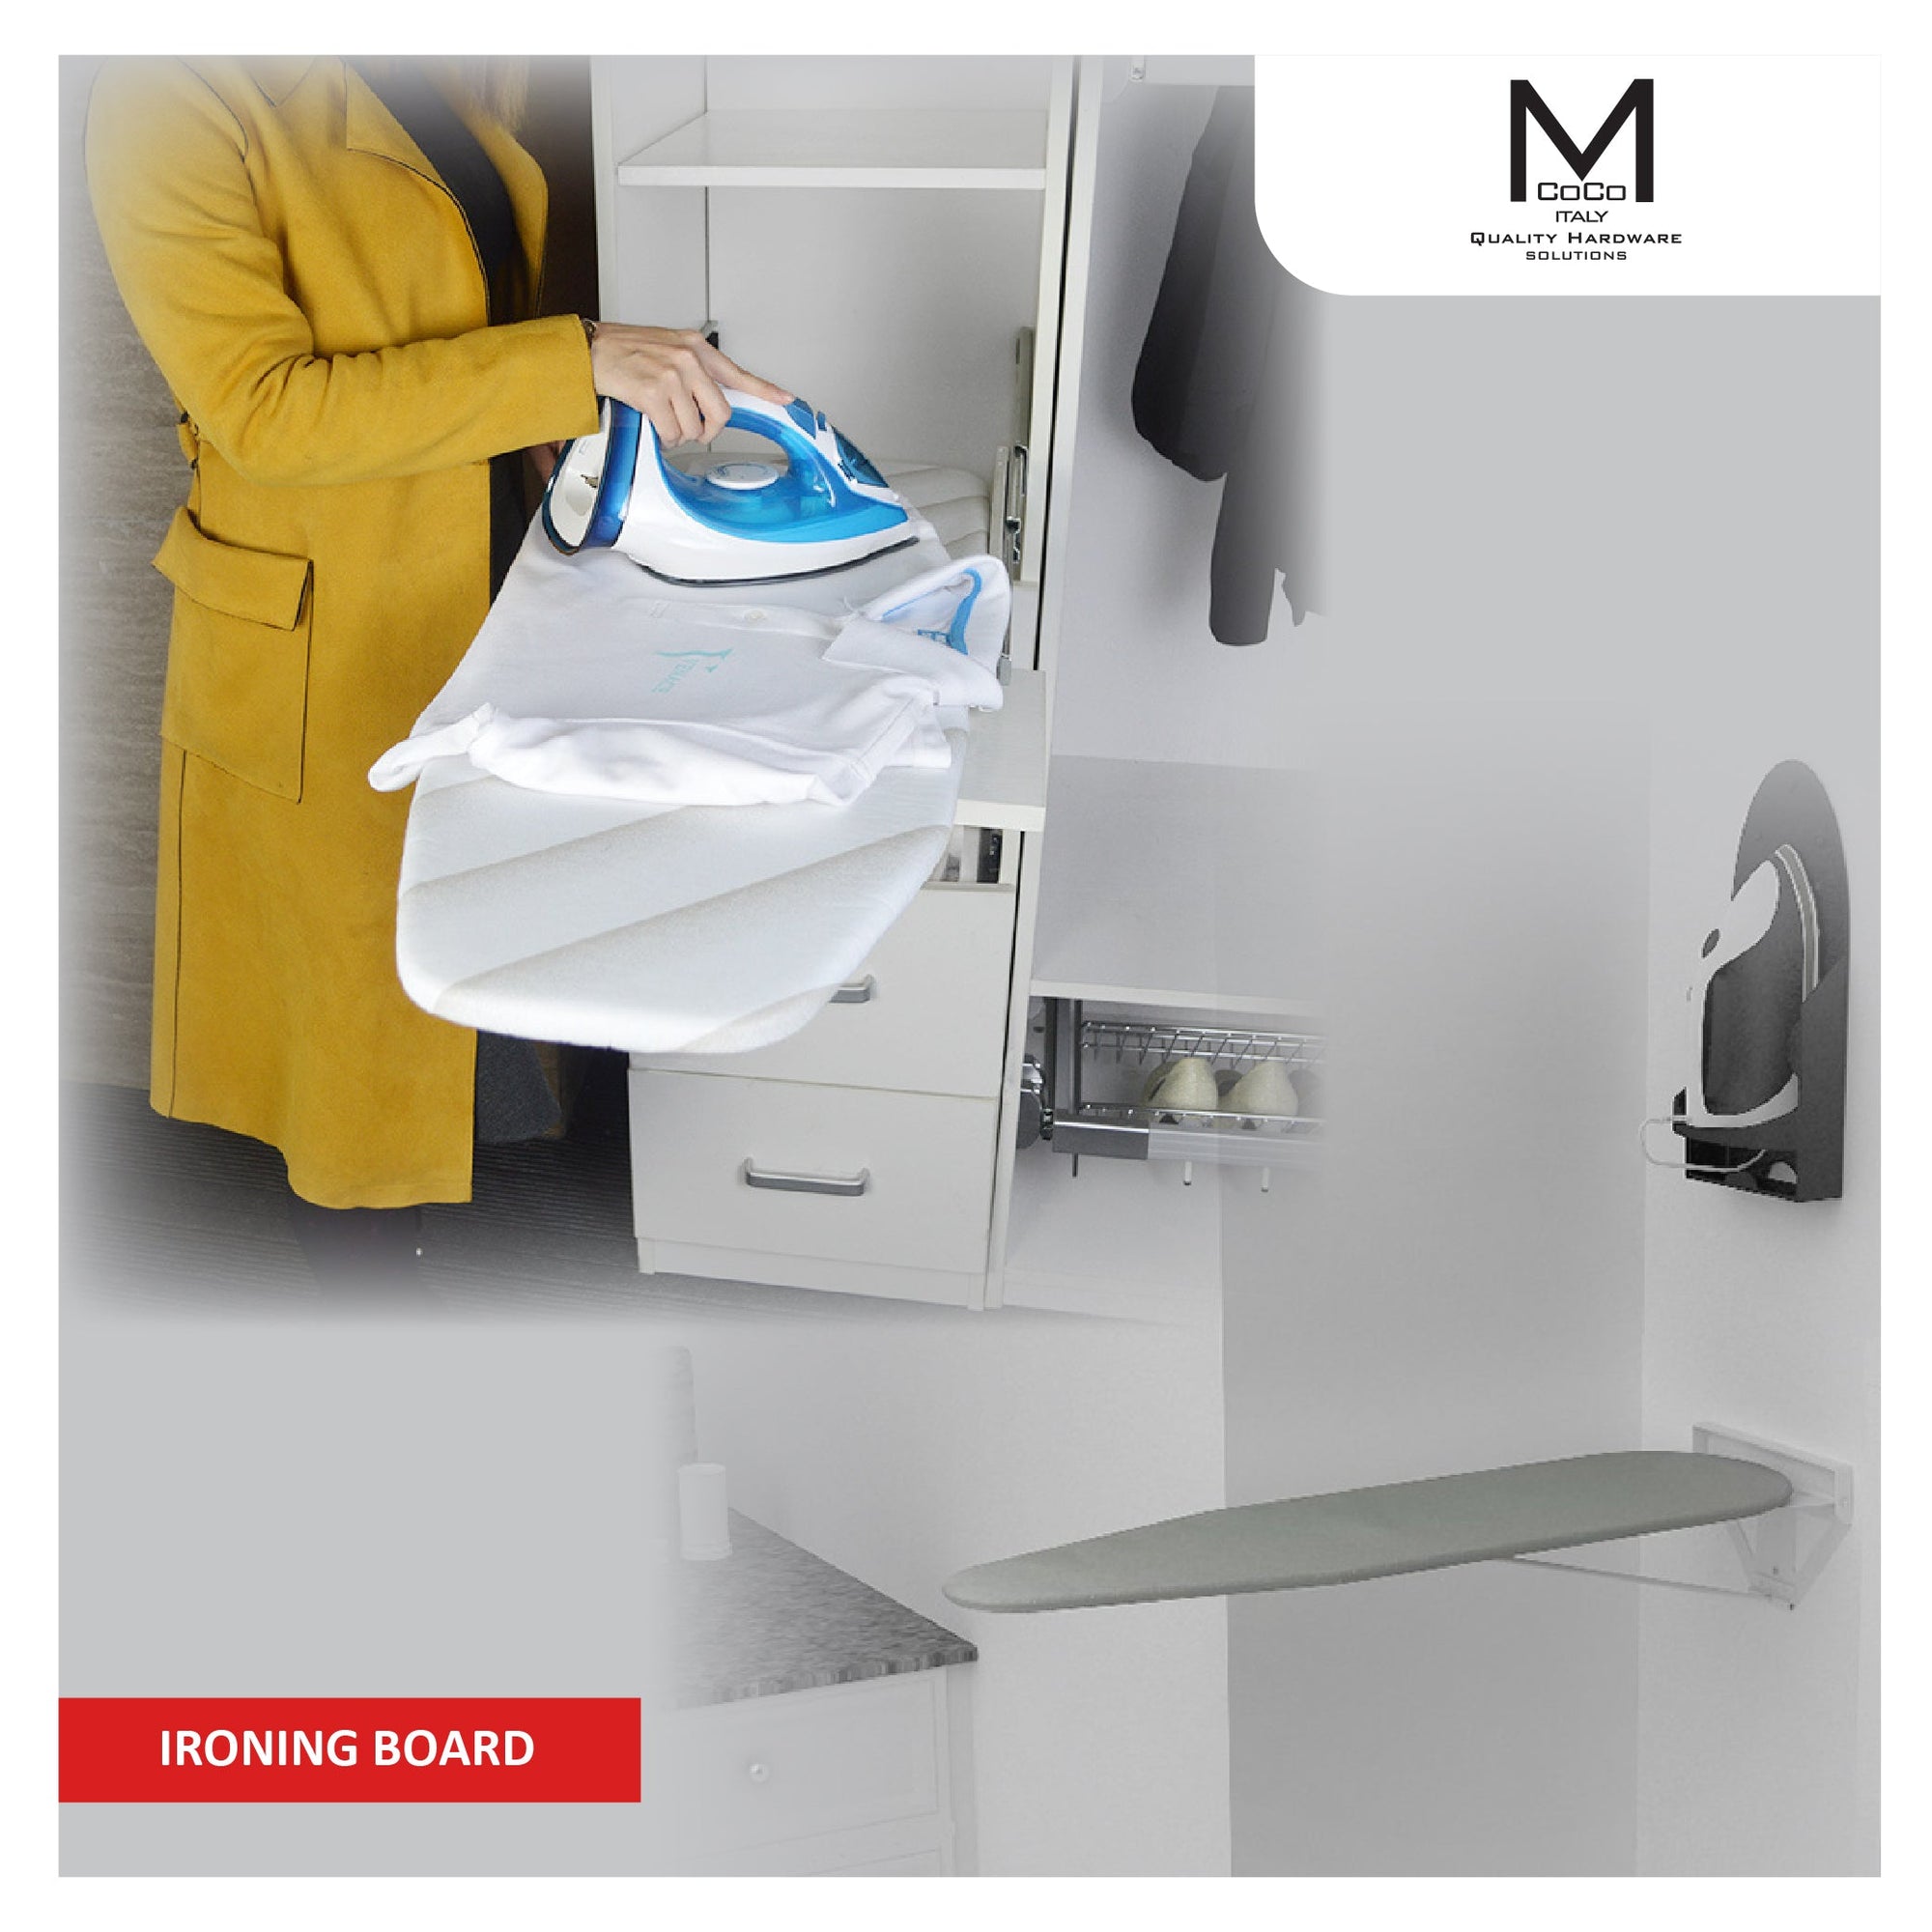 Mcoco Ironing Board - High-Quality Ironing Boards for Effortless Ironing - Shop Now at M. M. Noorbhoy & Co.